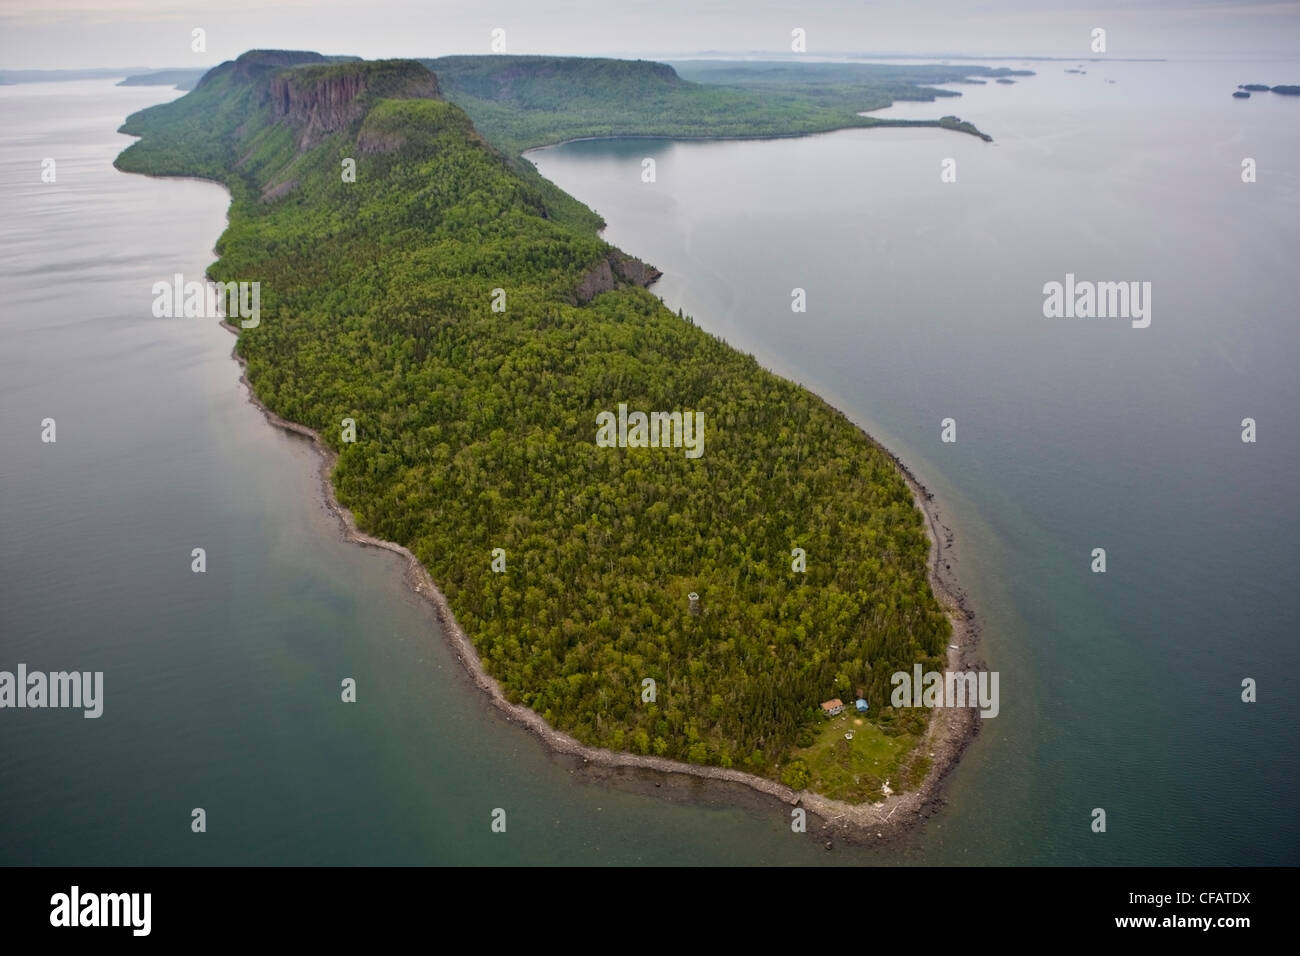 Aerial view of Sleeping Giant Provincial Park on Sibley Peninsula fringed by Lake Superior near Thunder Bay, Ontario, Canada Stock Photo